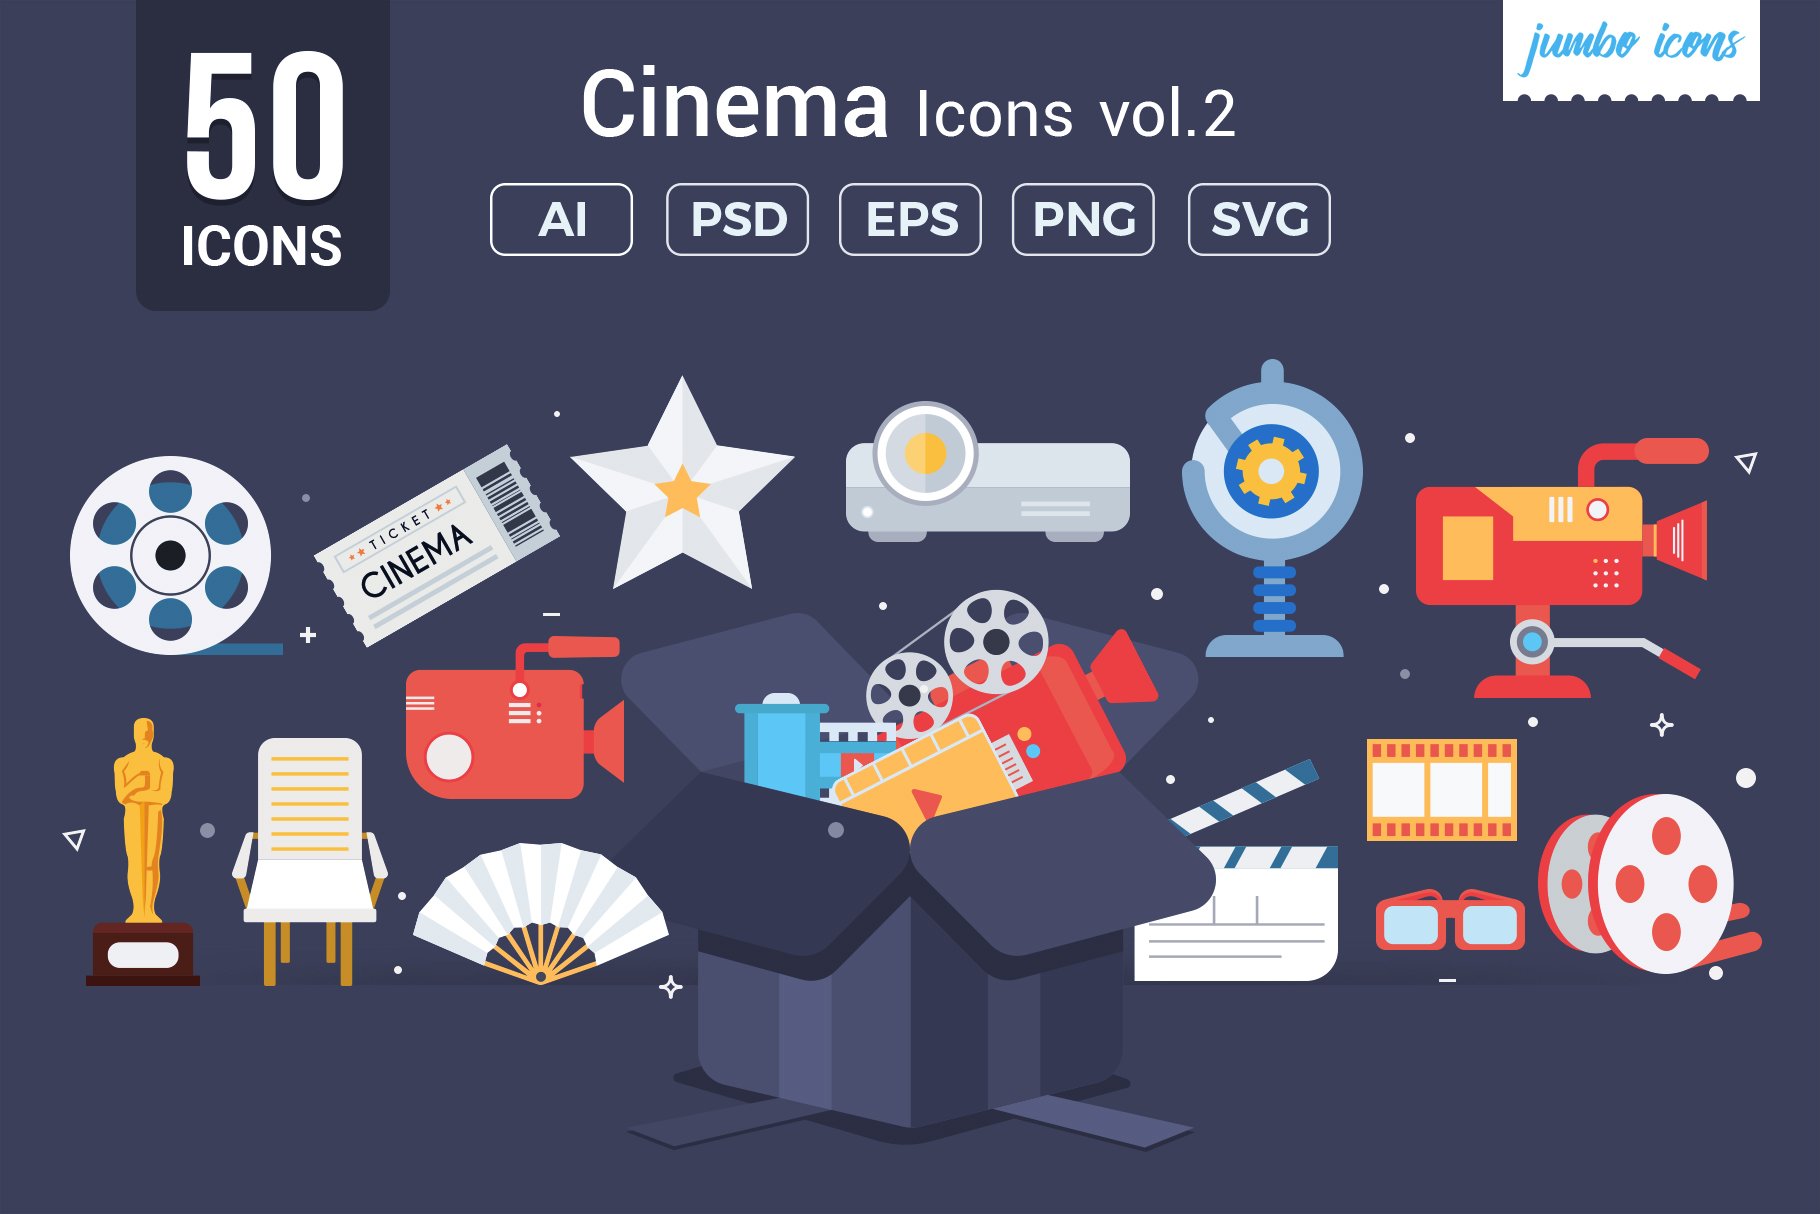 Cinema Vector Icons V2 cover image.